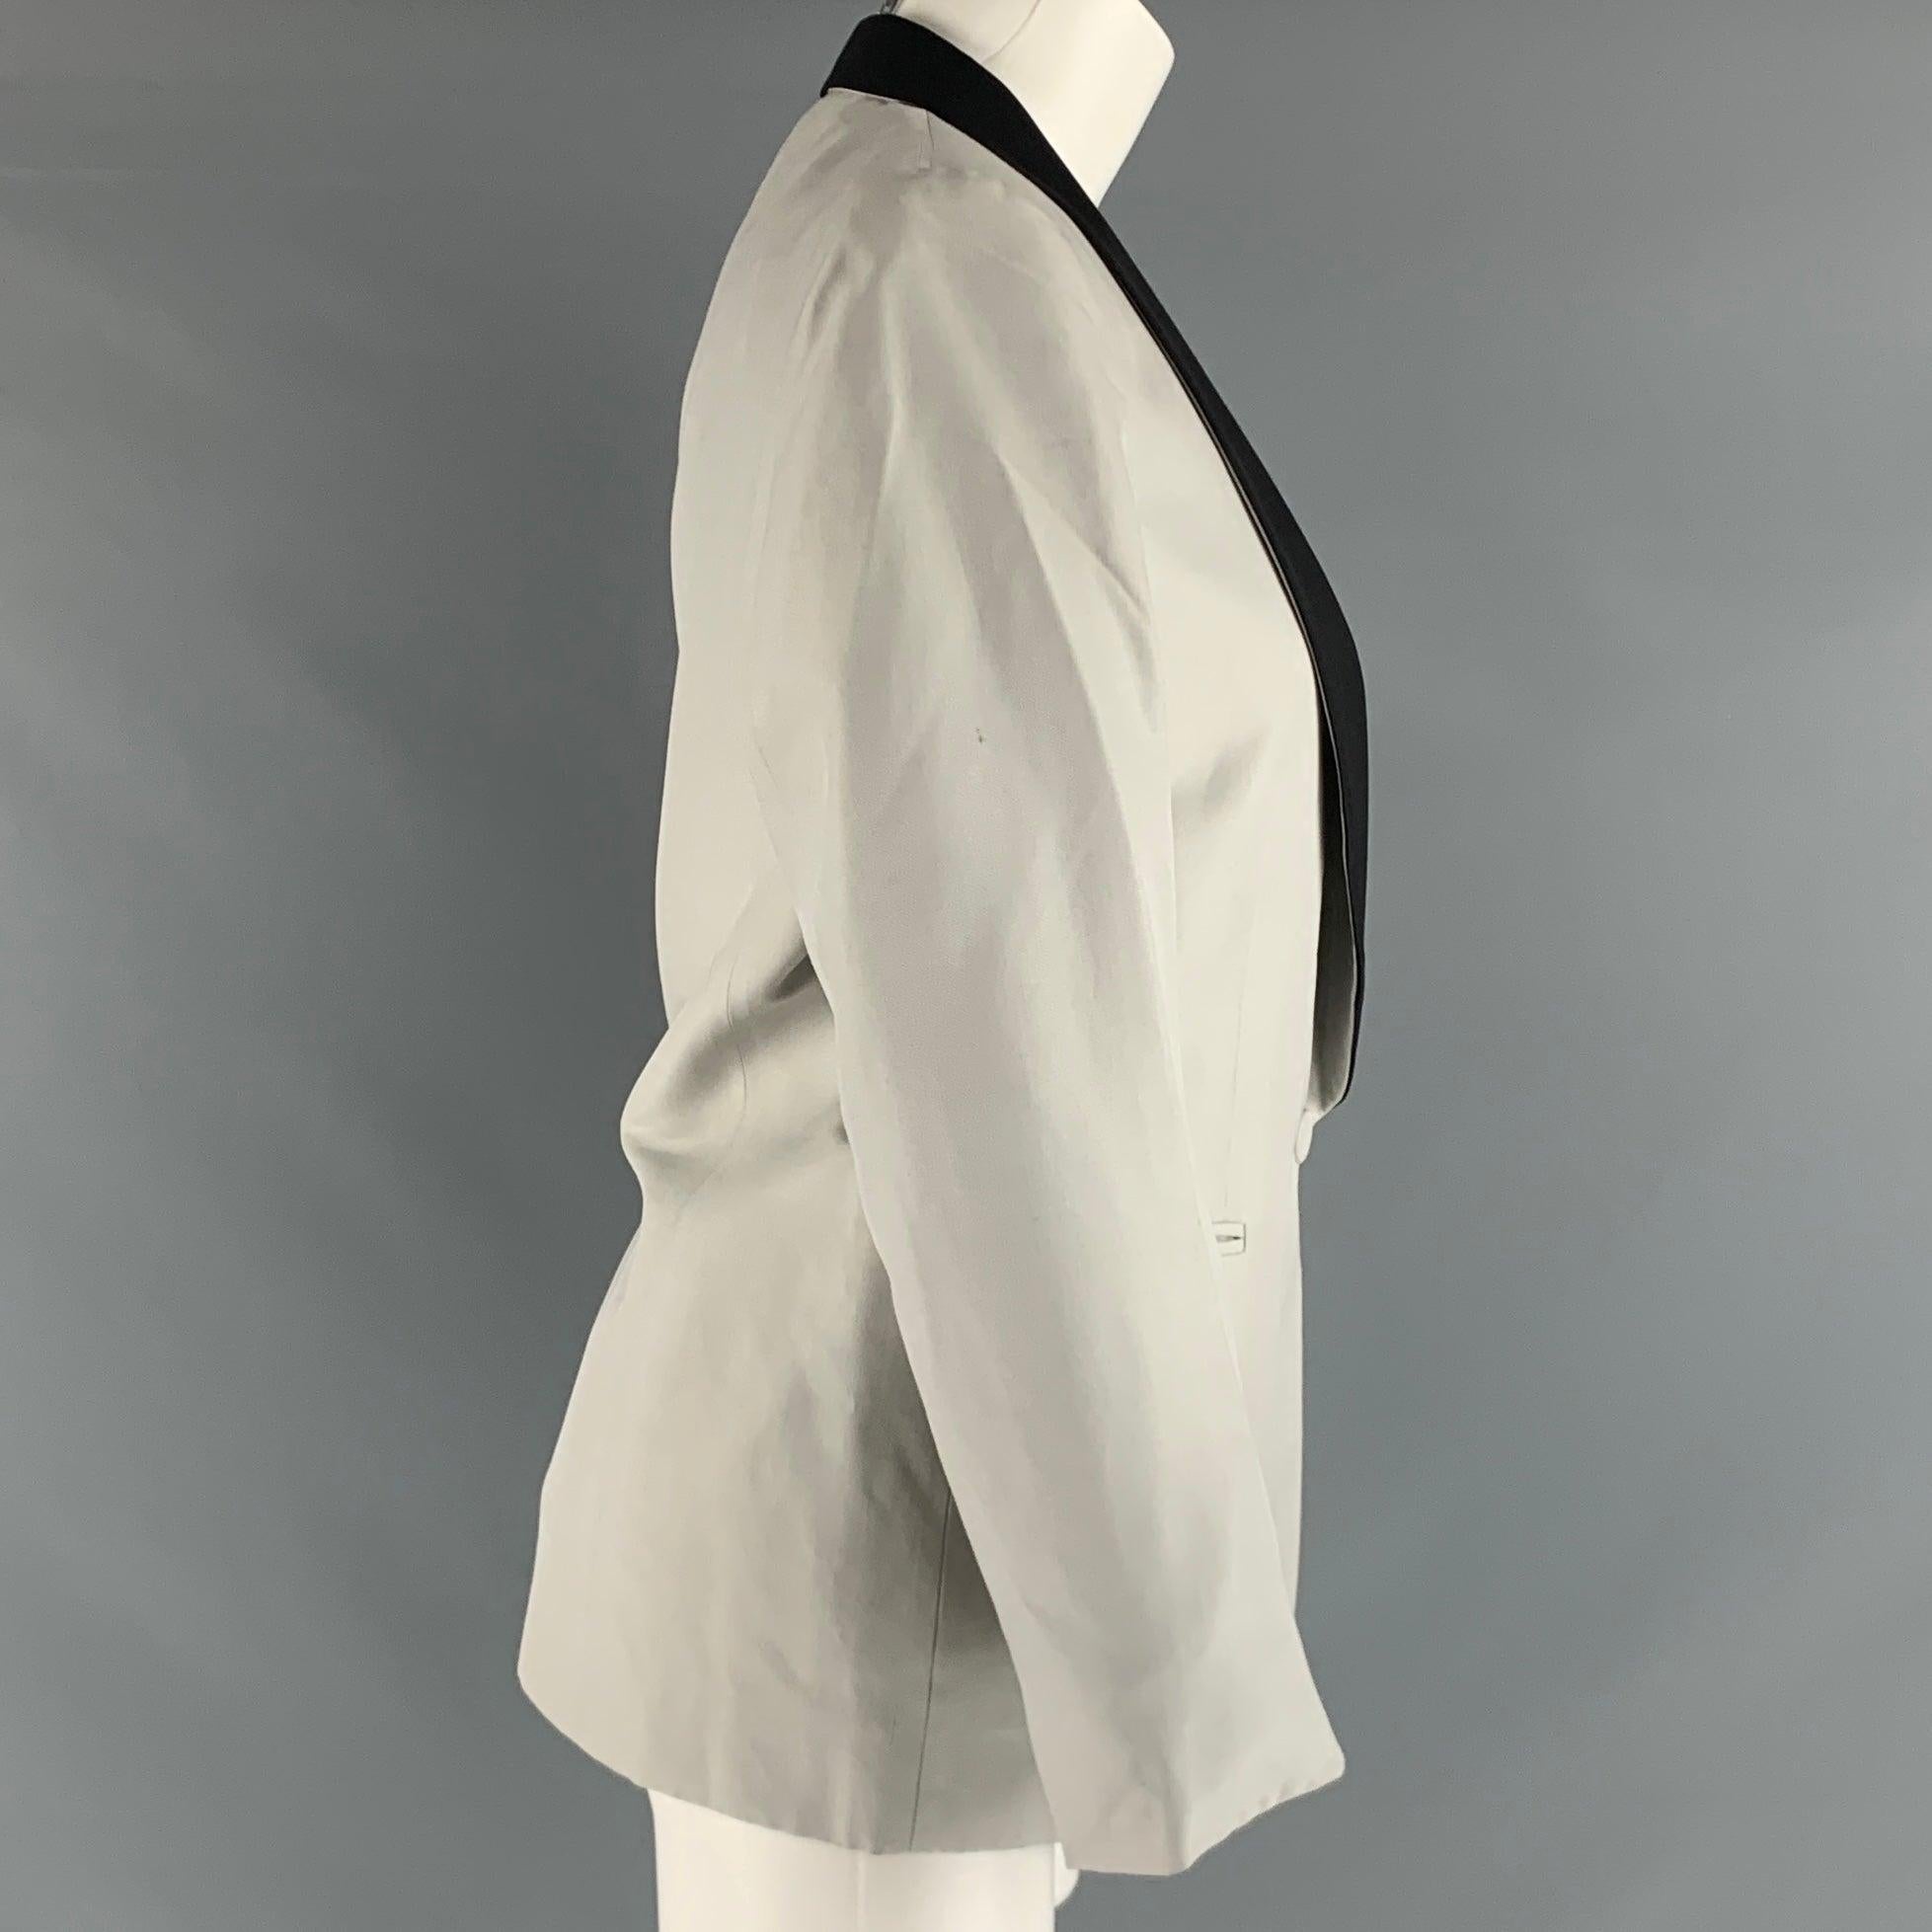 STELLA McCARTNEY blazer comes in a silver silk woven featuring a black shawl lapel, welt pockets, and a single button closure. Made in Italy.Very Good Pre- Owned Condition. Minor spots, please check picture. 

Marked:   44 

Measurements: 
